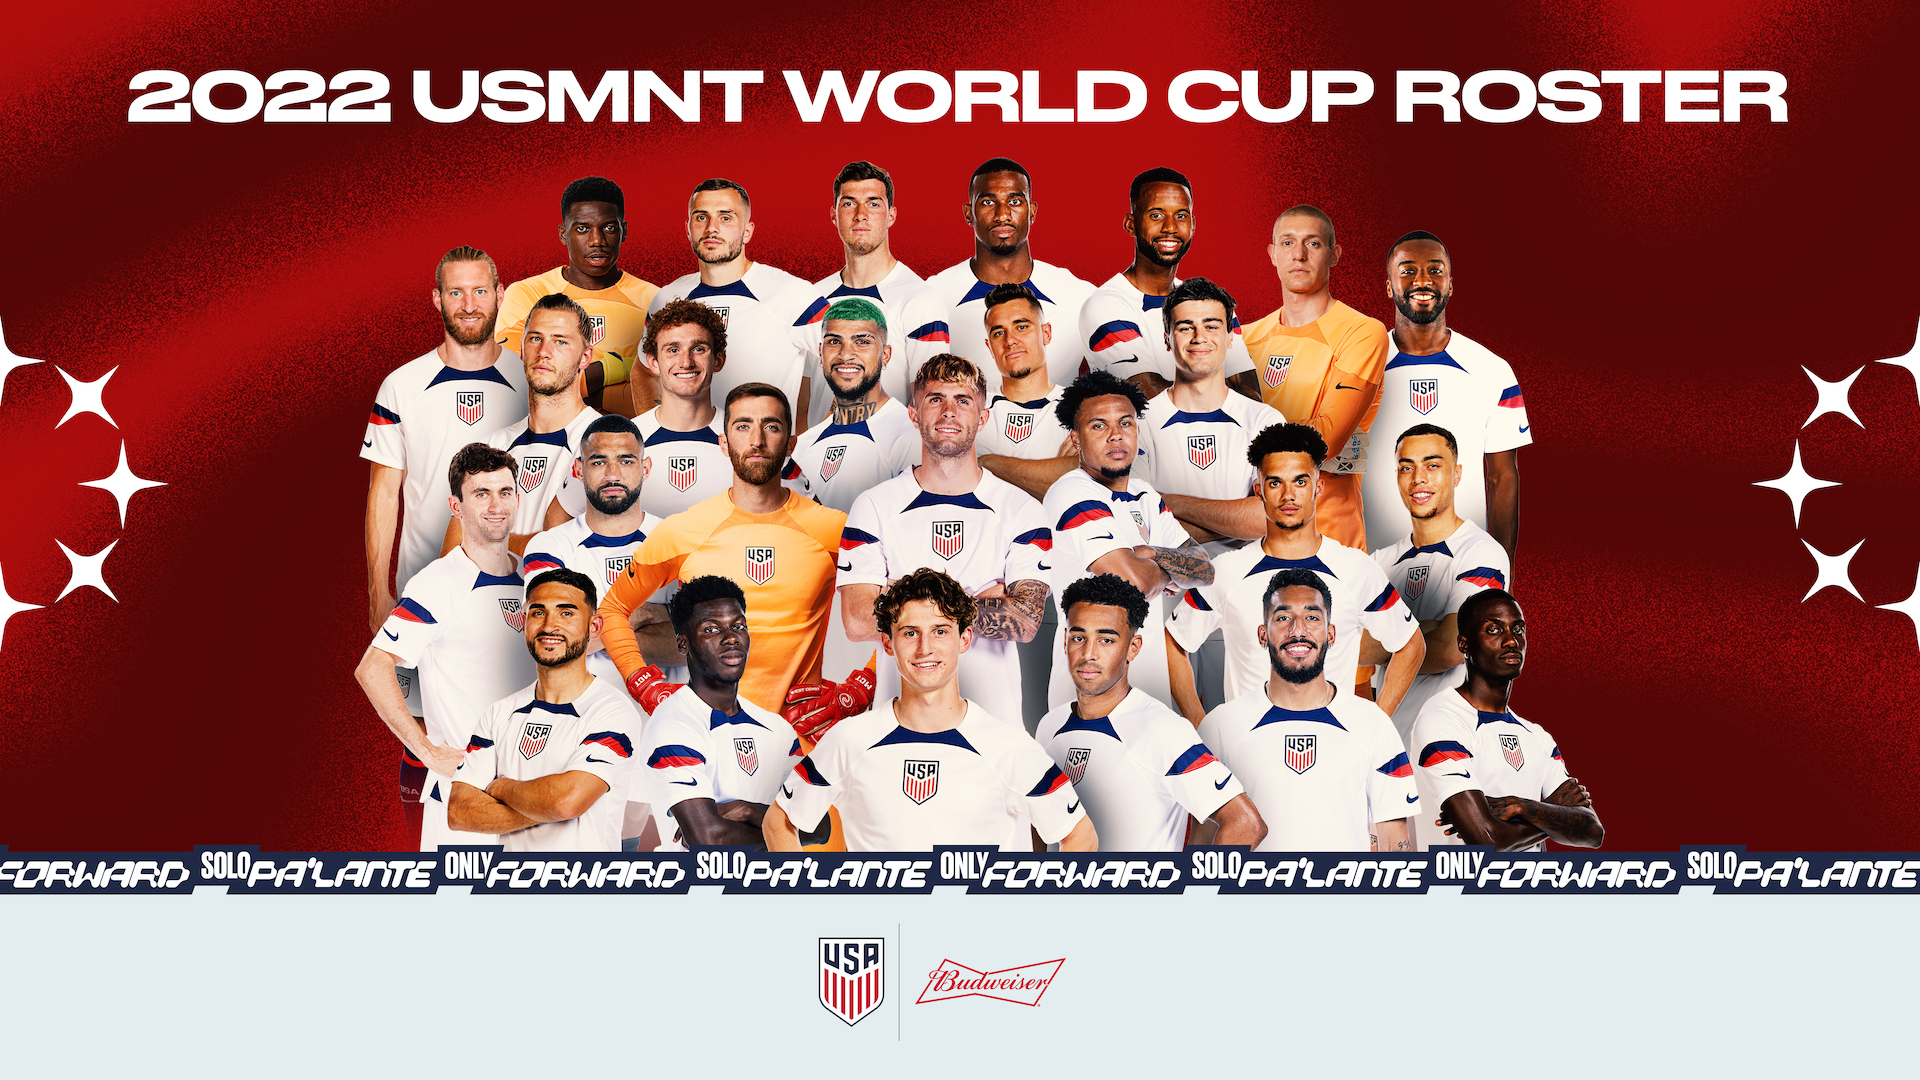 fifa world cup usa schedule